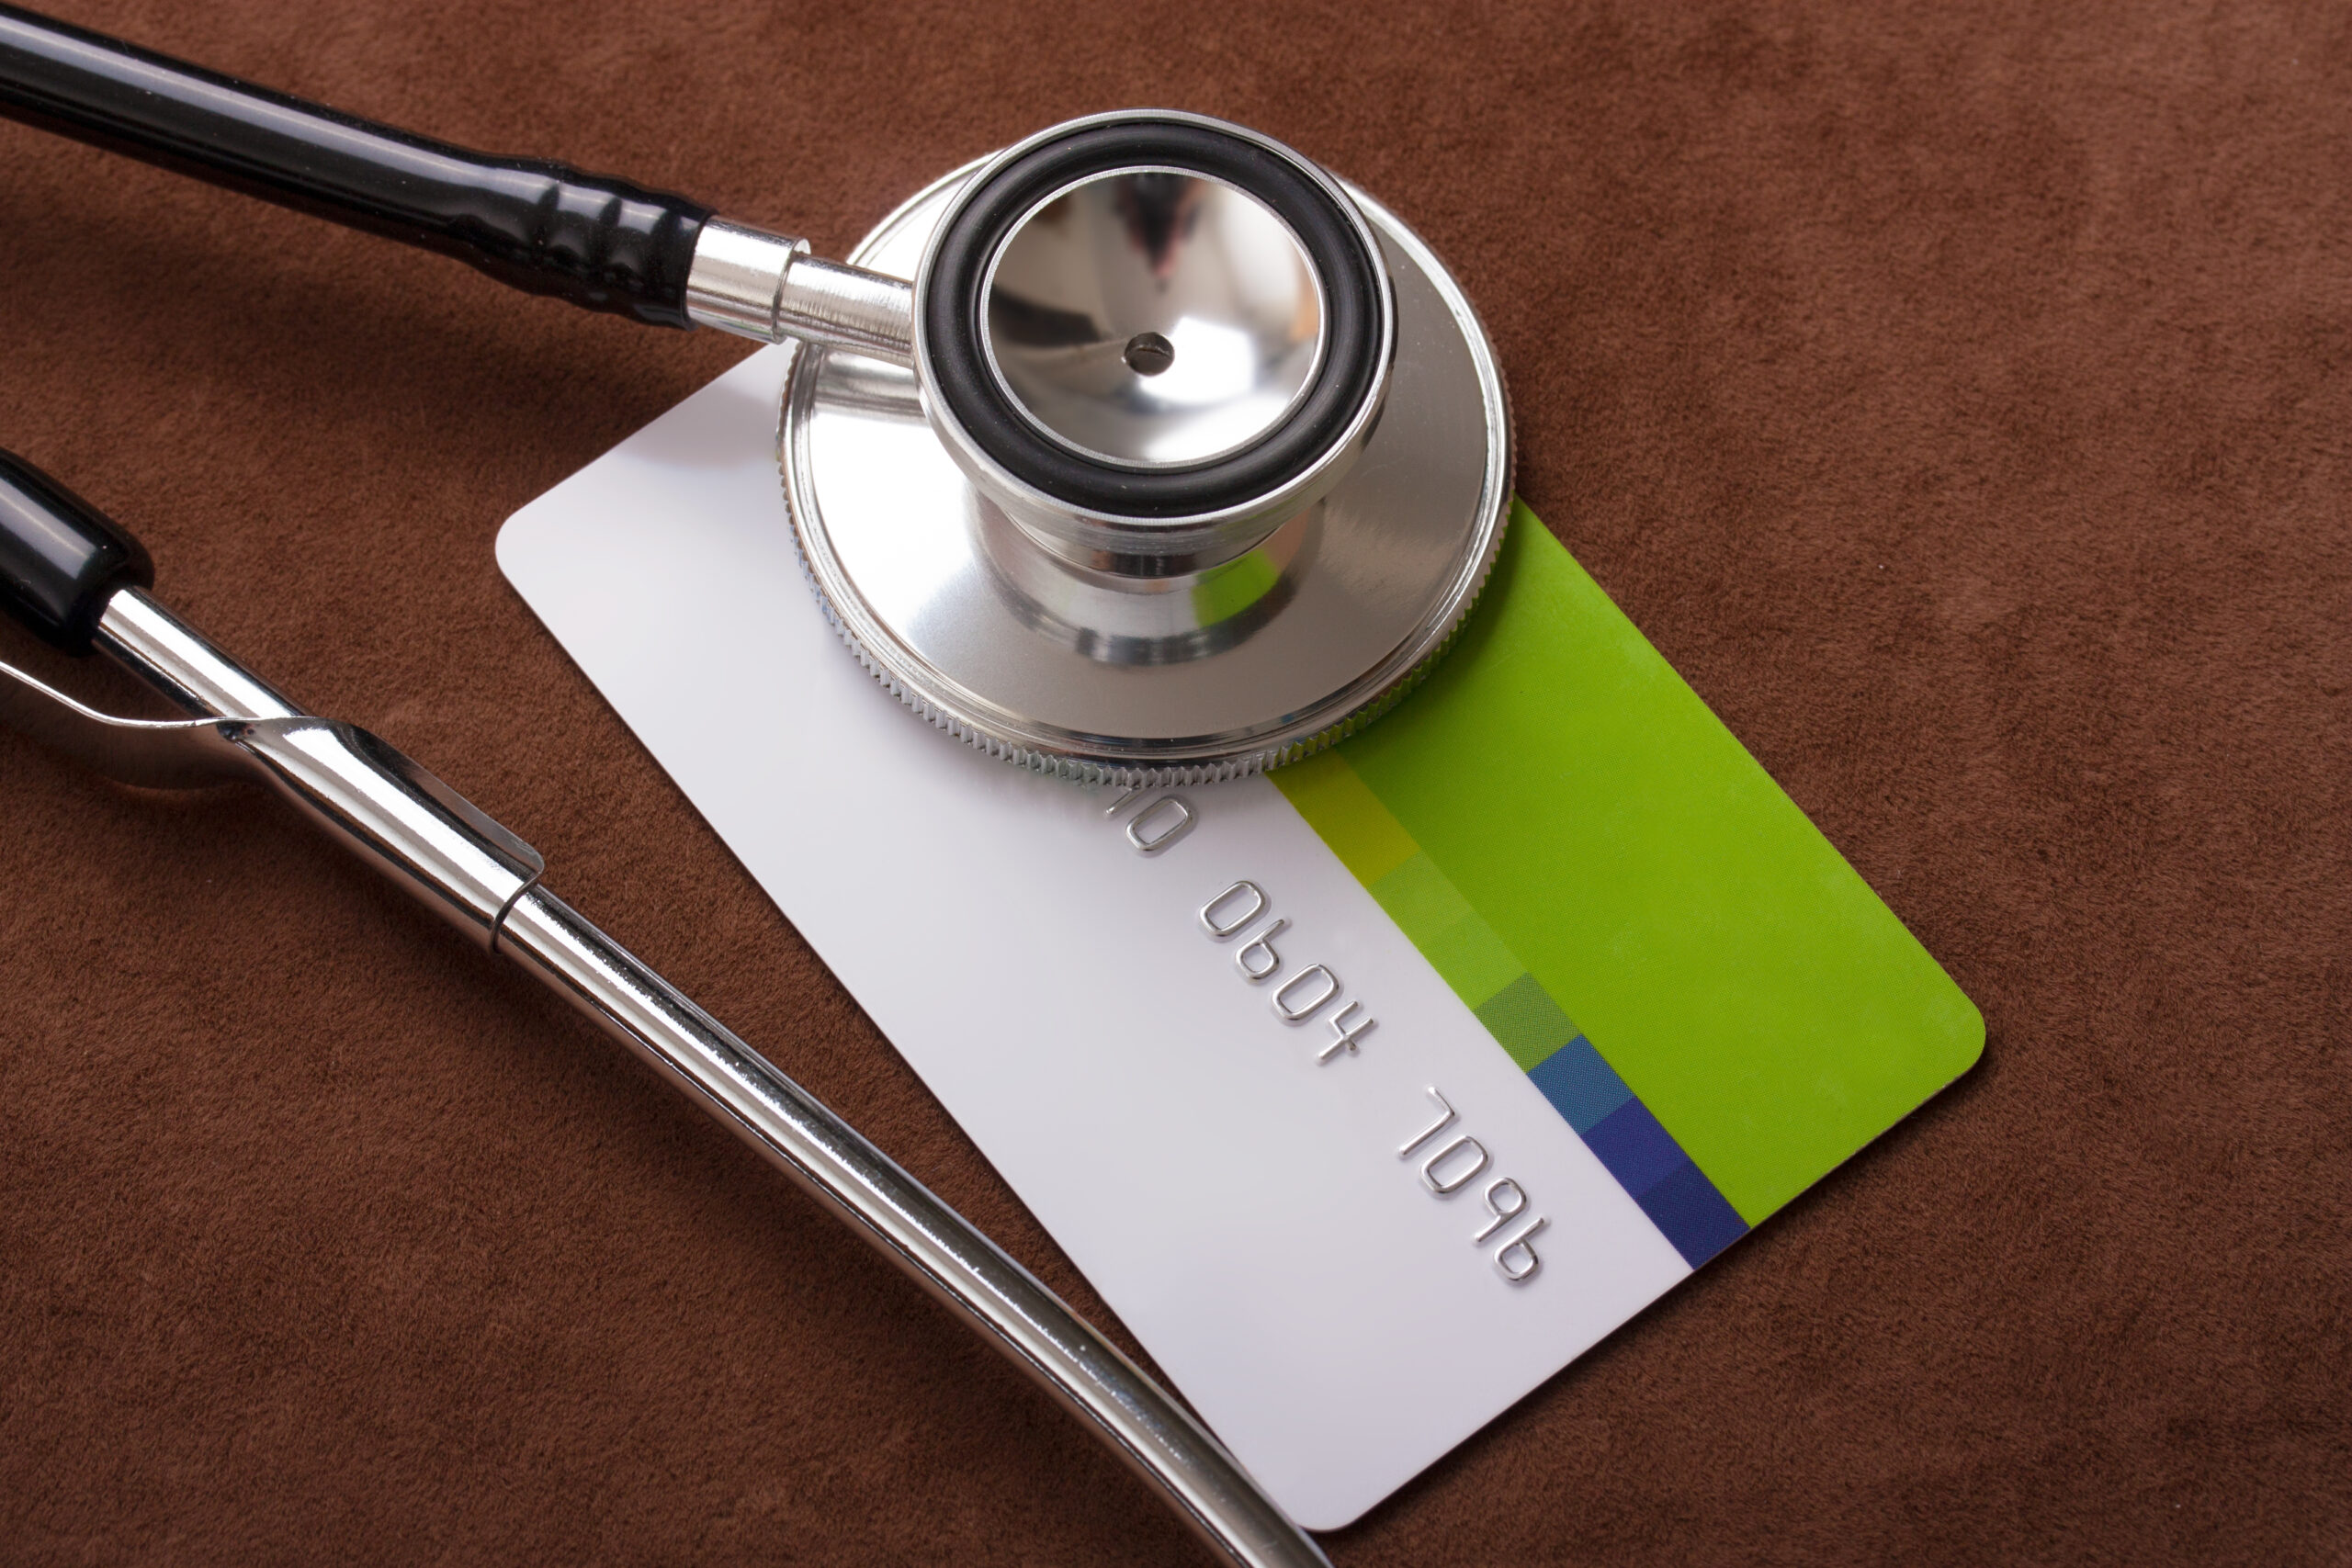 Stethoscope,On,A,Credit,Card,Concept,With,A,Brown,Background